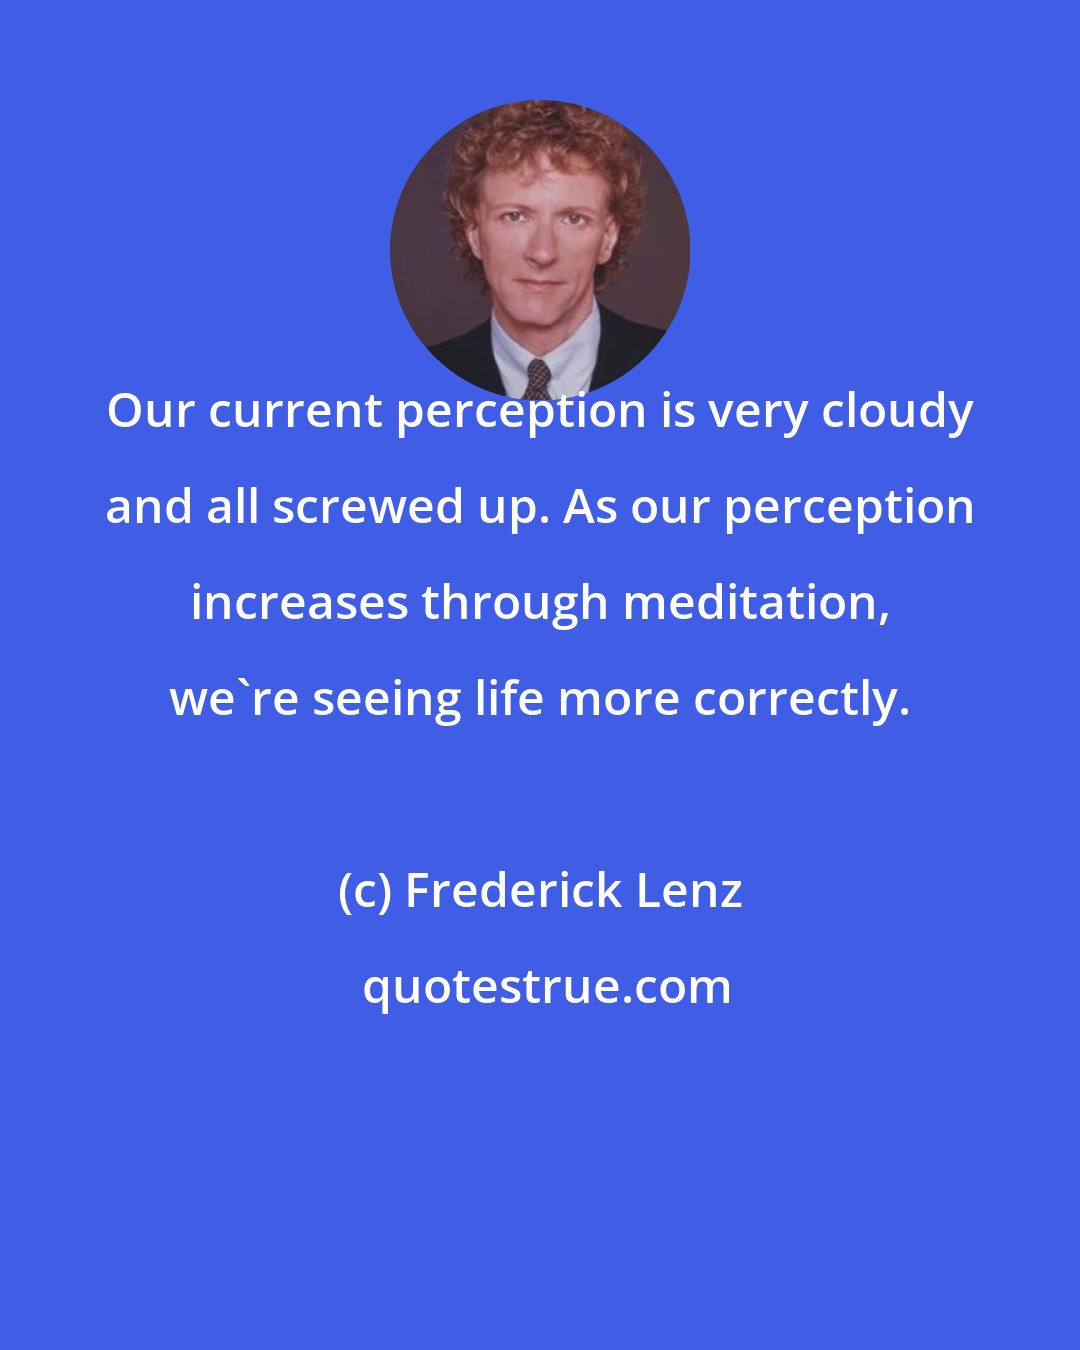 Frederick Lenz: Our current perception is very cloudy and all screwed up. As our perception increases through meditation, we're seeing life more correctly.